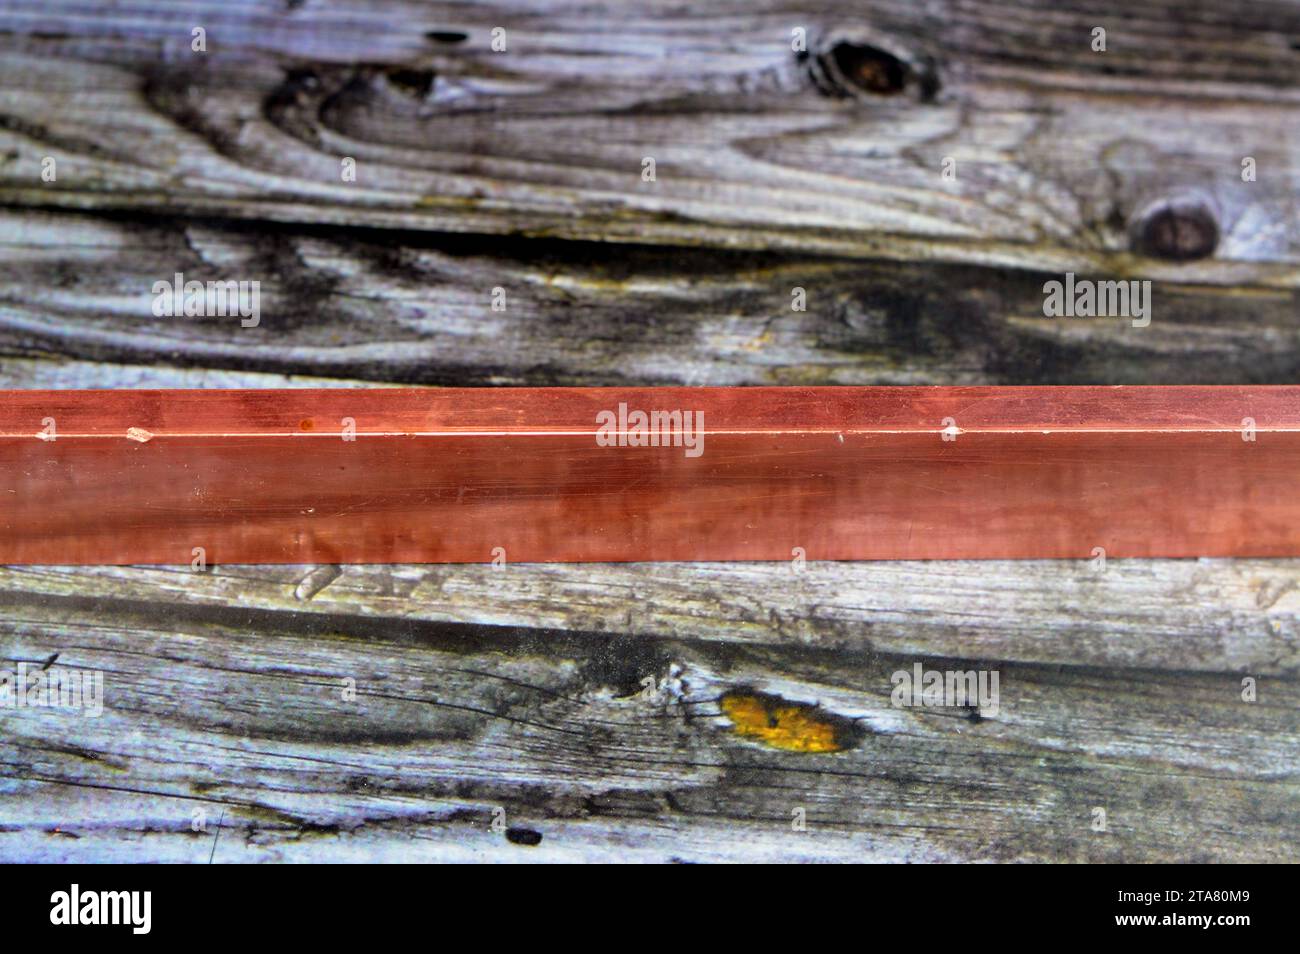 Long heavy copper bar, Copper is a mineral, an element and a metal, used in wiring, roofing, pipes, pots and pans, decorations and artworks, jewelry a Stock Photo